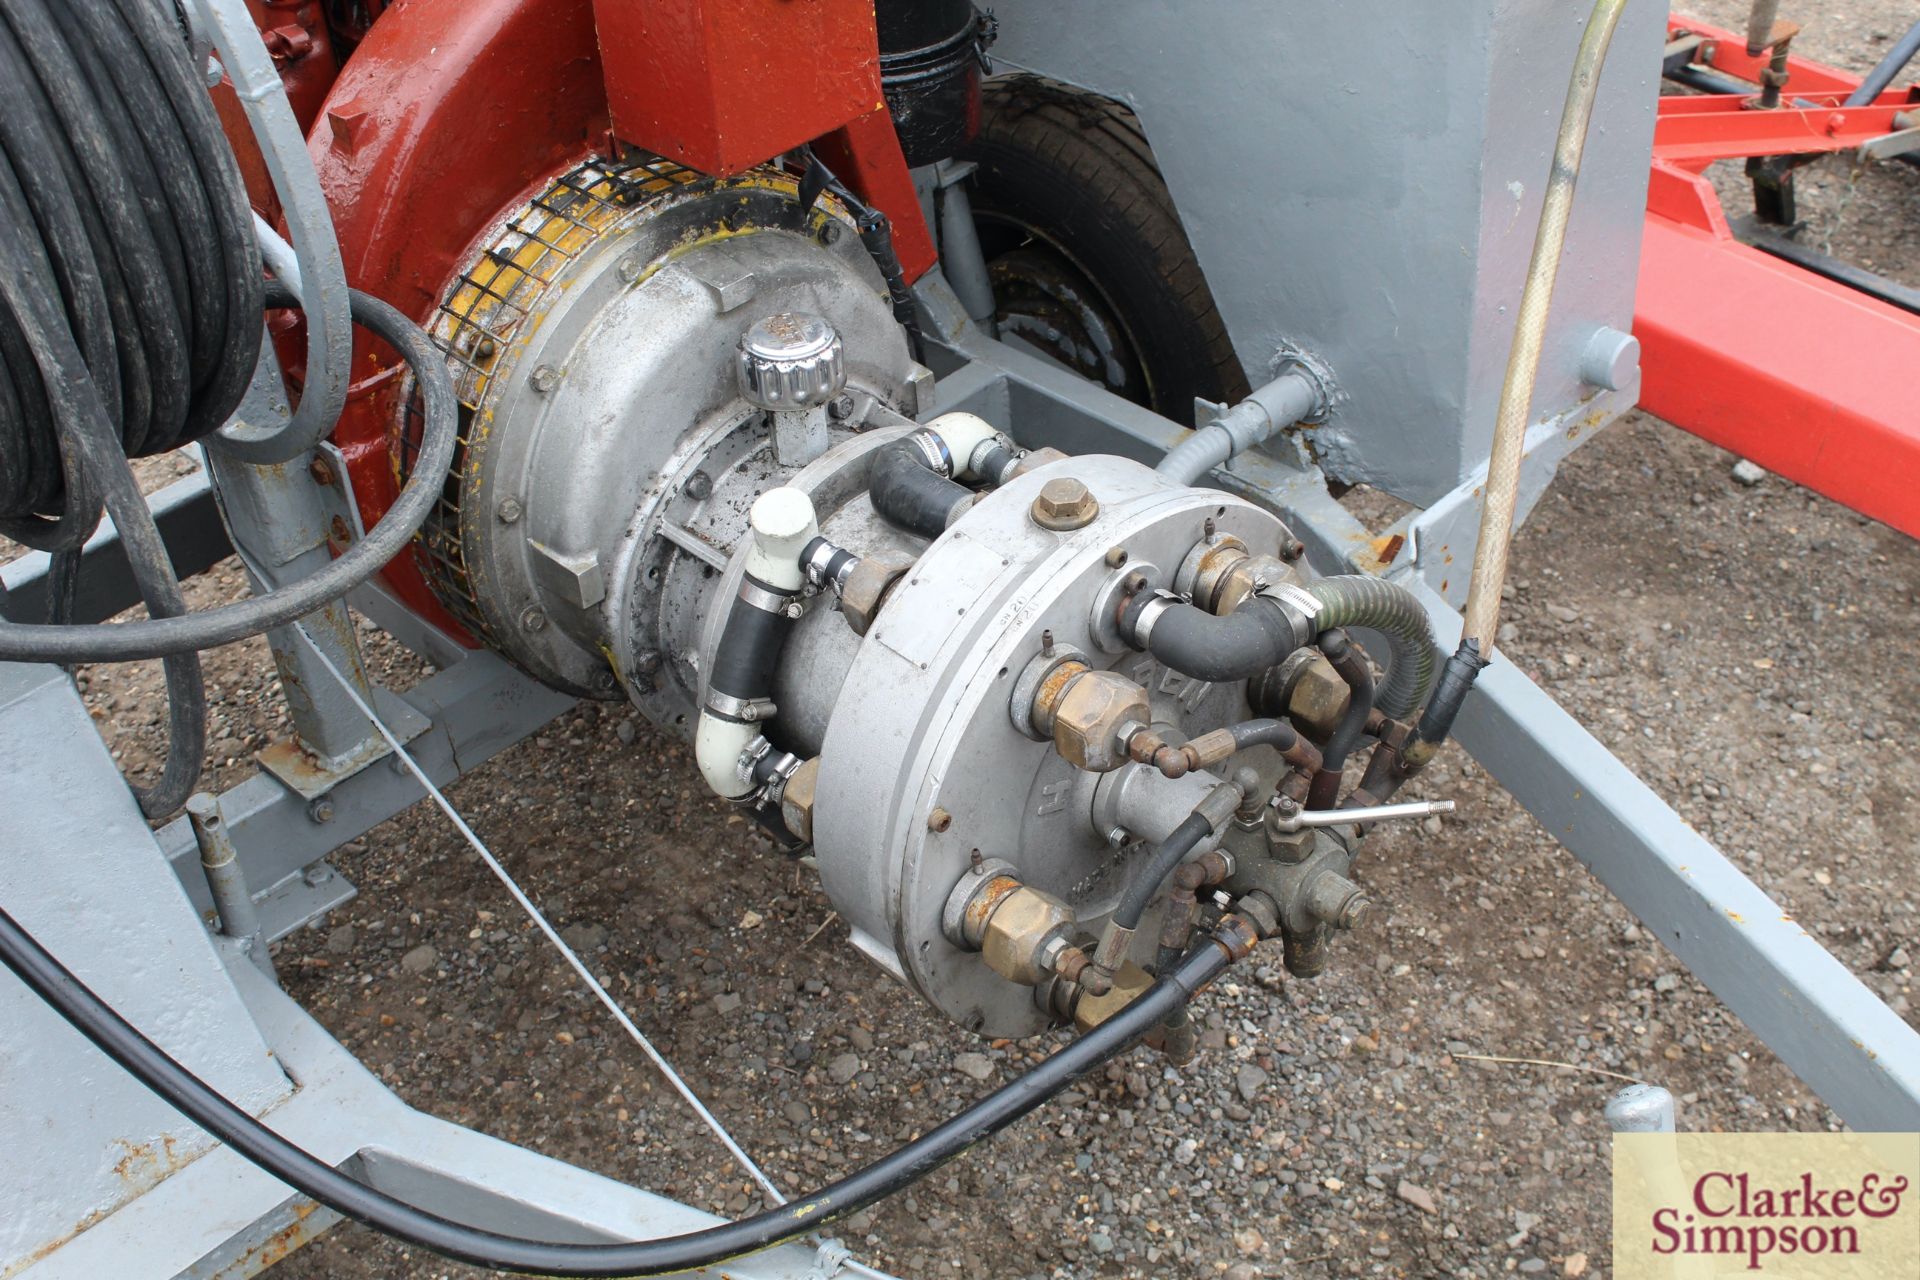 Harben fast tow high pressure drain jetter. With Lister diesel engine. - Image 5 of 8